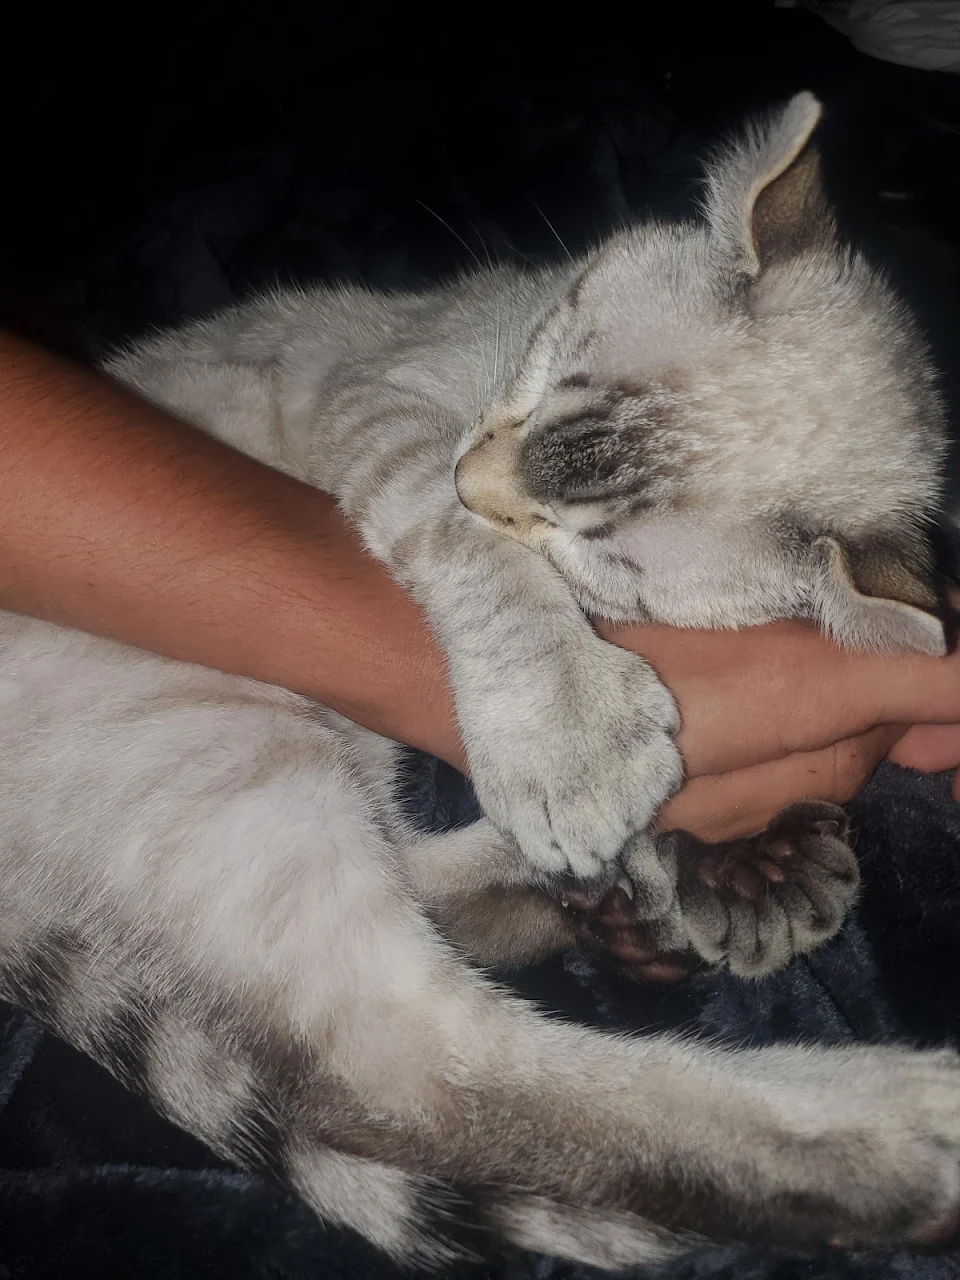 he's hugging my hand, my heart is literally melting